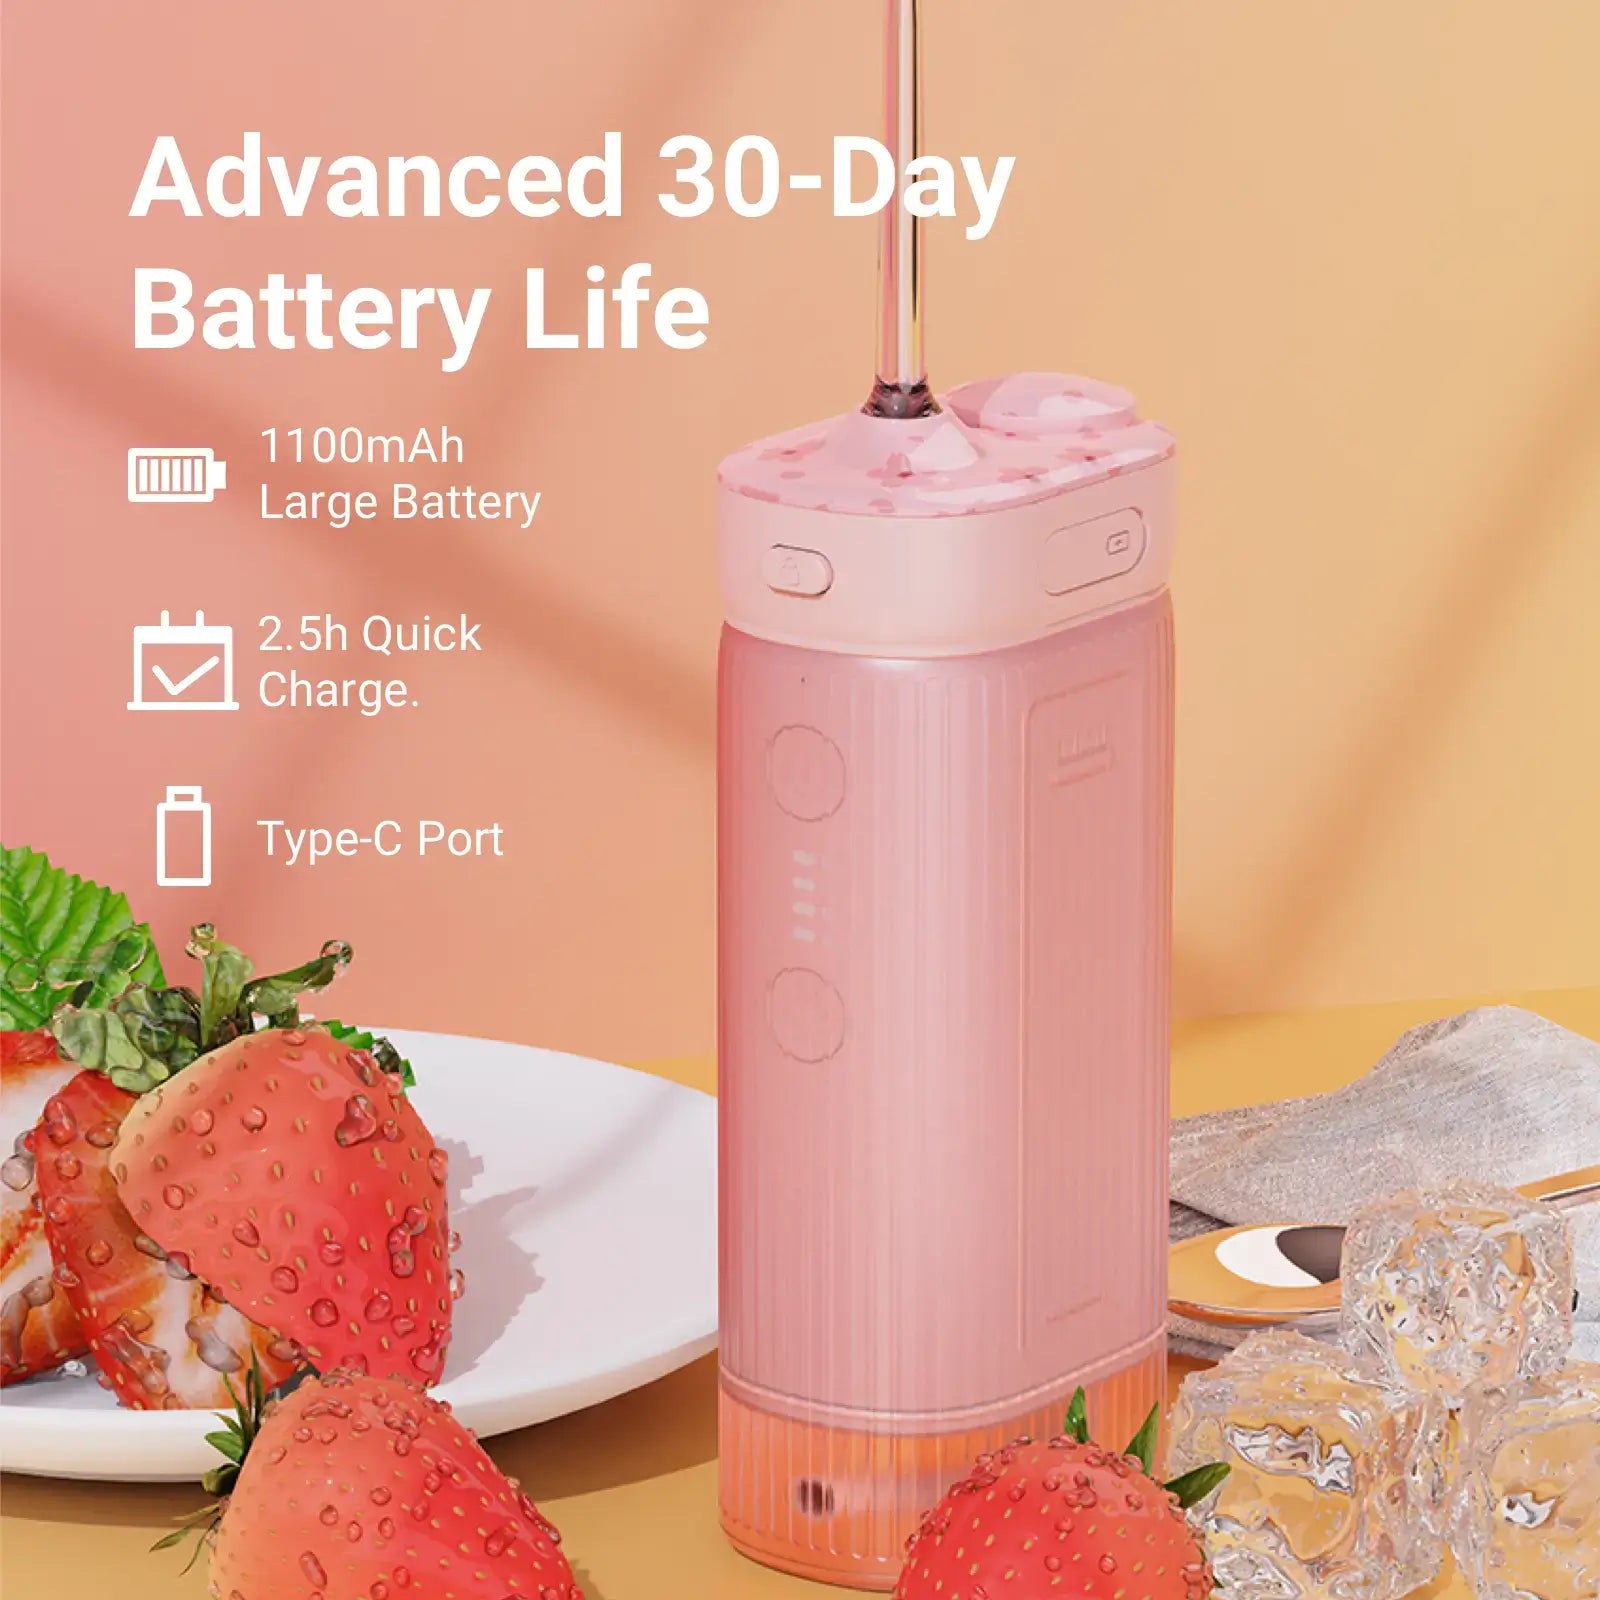 Advanced 30-Day Battery Life- 1100mAh Large Battery - 2.5h Quick Charge. - Type-C Port